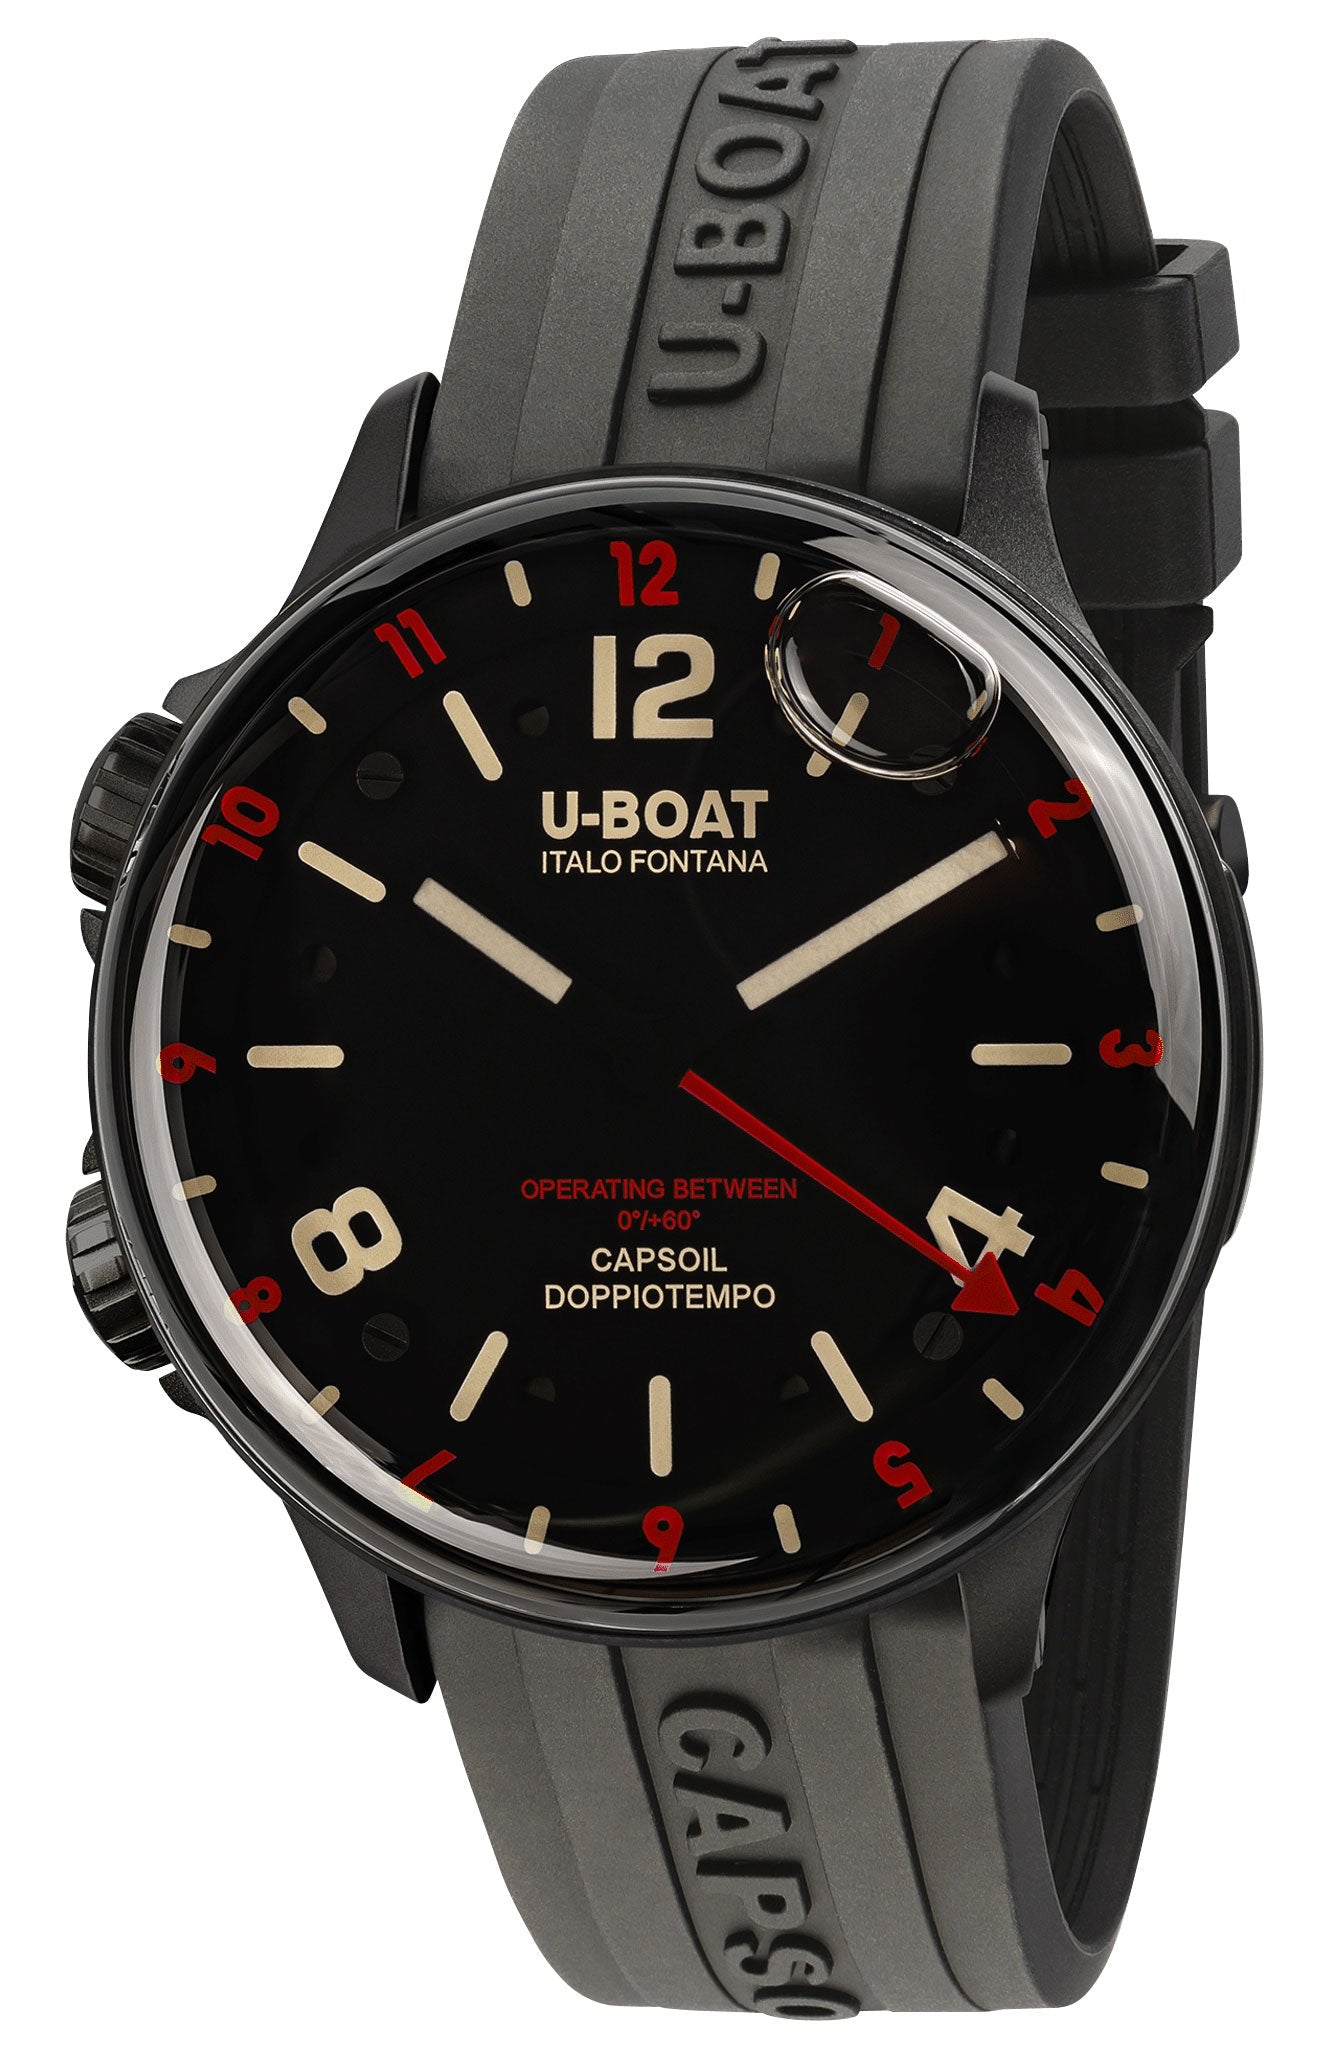 update alt-text with template Watches - Mens-U-Boat-8841-12-hour display, 40 - 45 mm, 45 - 50 mm, bi-directional rotating bezel, black, black PVD case, Capsoil Doppiotempo, dual time zone, mens, menswatches, new arrivals, round, rpSKU_8769, rpSKU_8770, rpSKU_8838, rpSKU_8839, rpSKU_8840, rubber, swiss automatic, swiss quartz, U-Boat, watches-Watches & Beyond